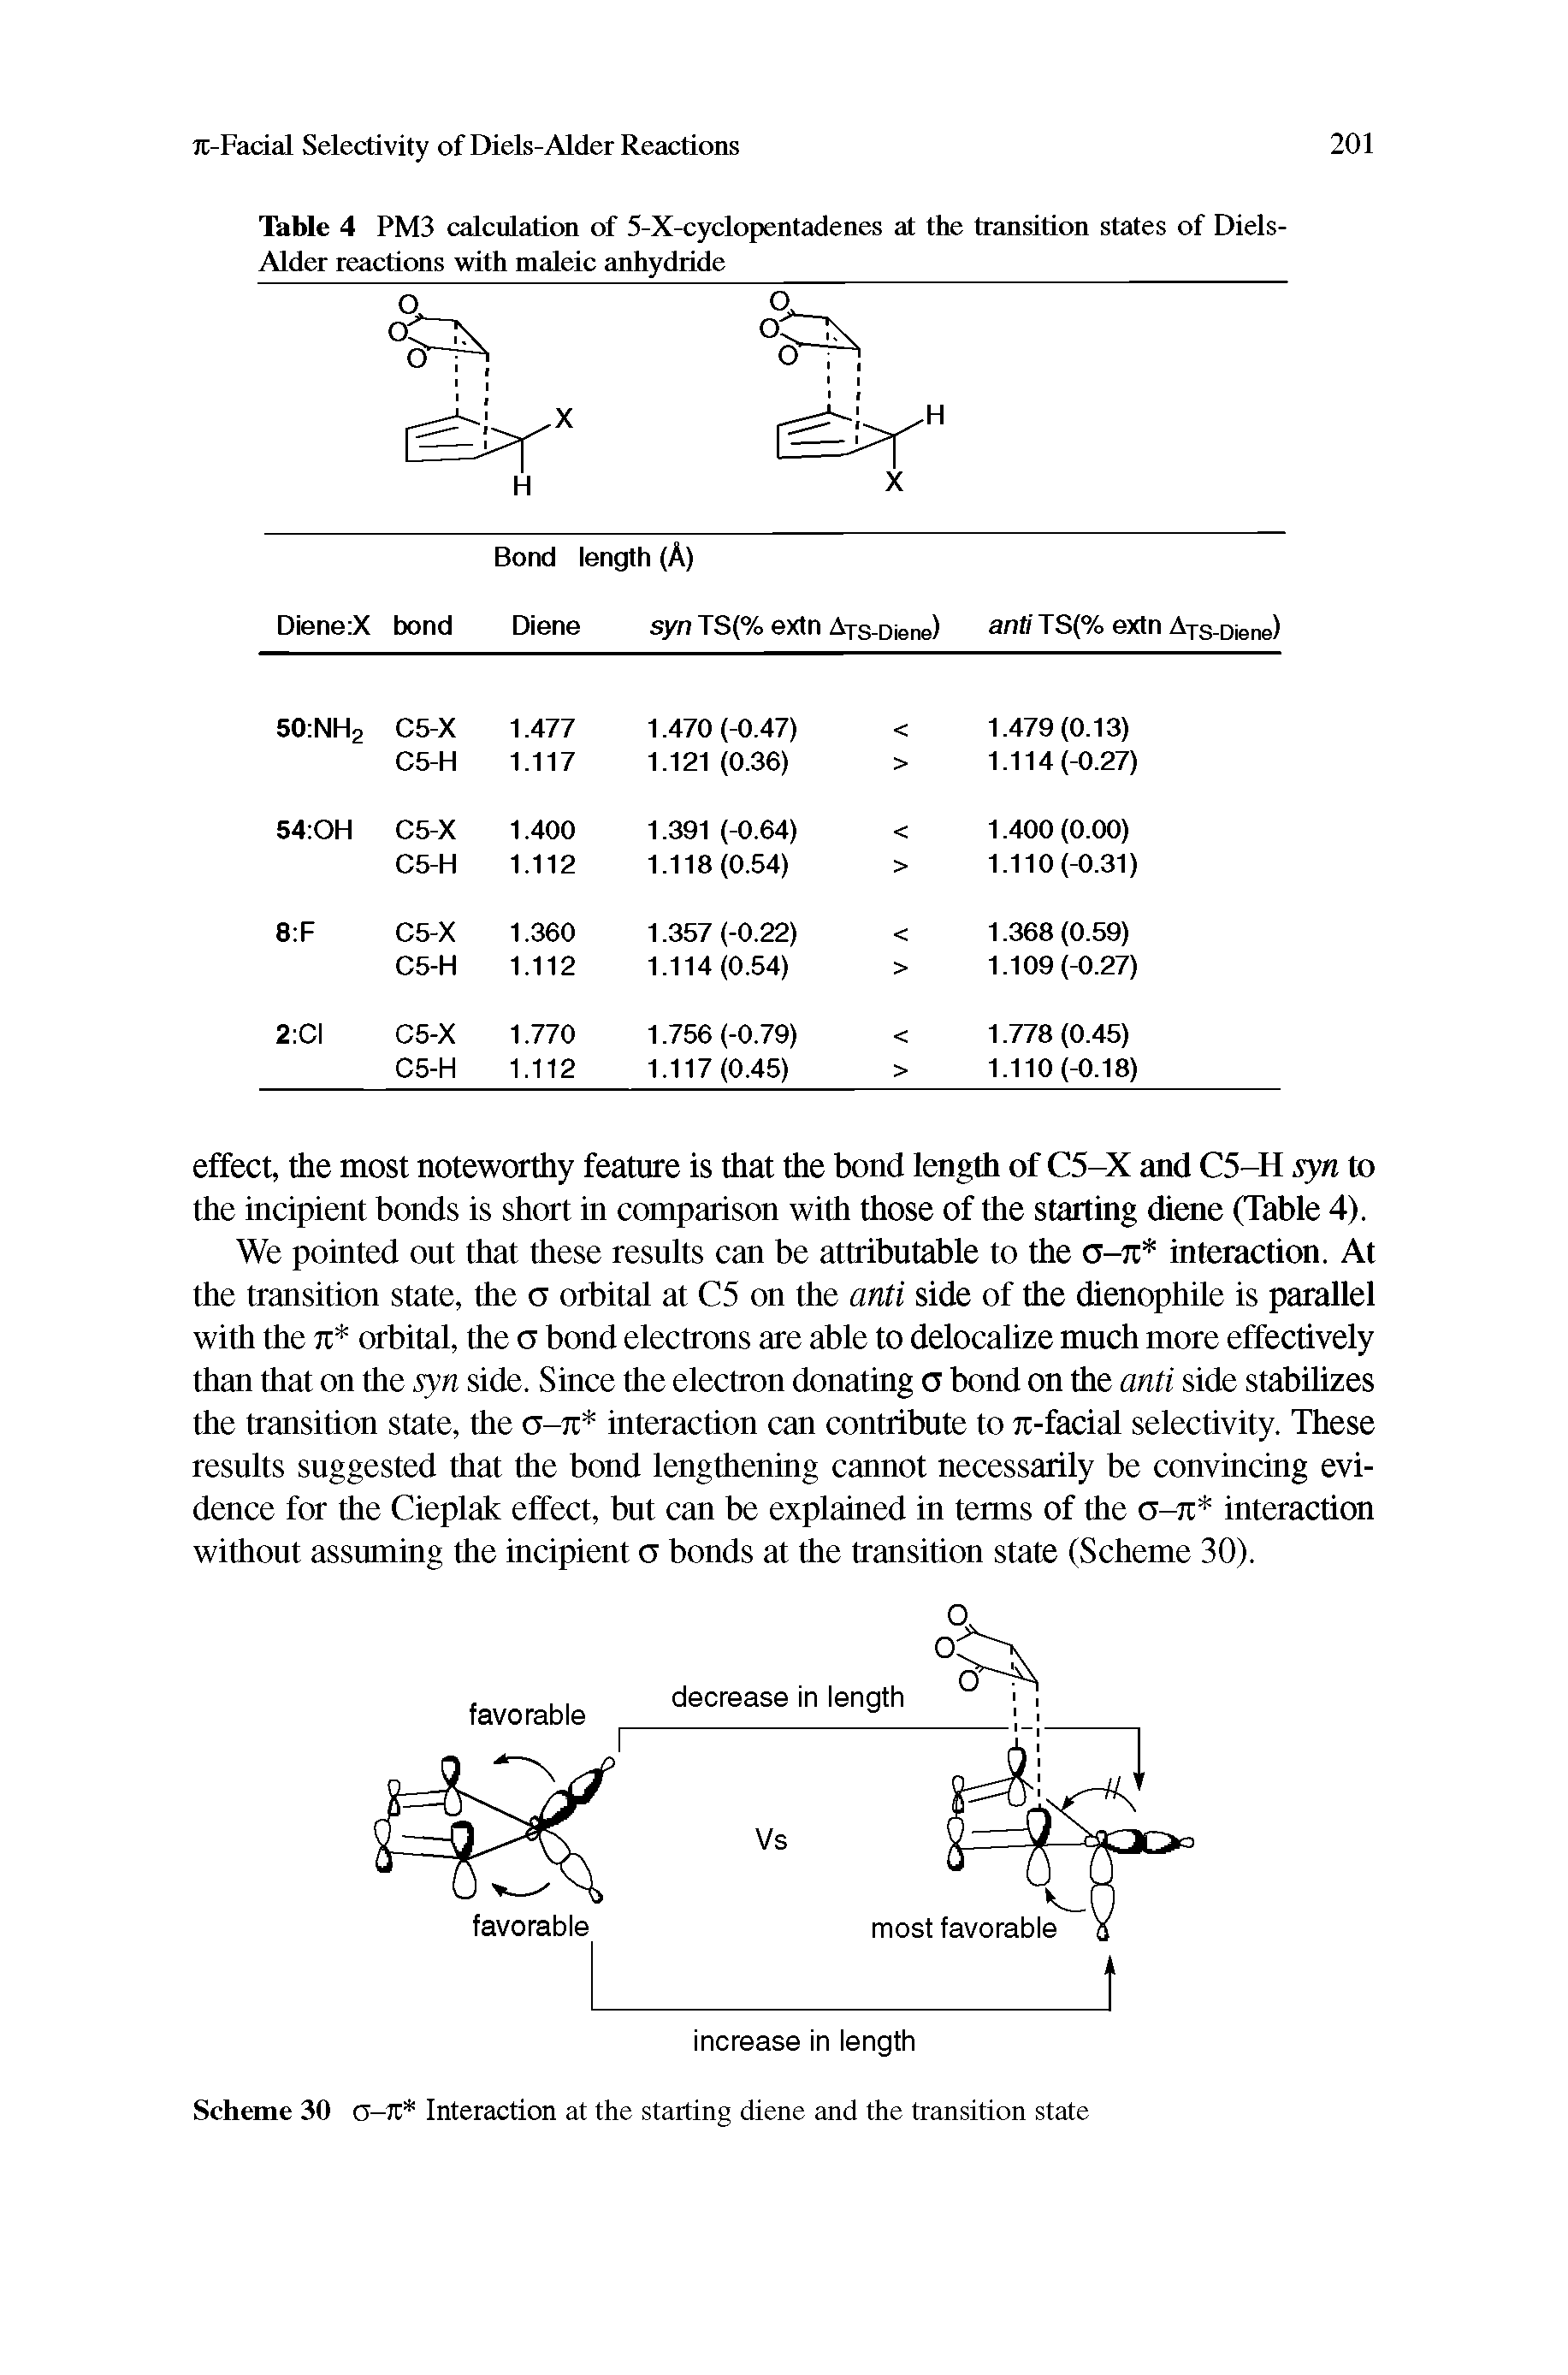 Table 4 PM3 calculation of 5-X-cyclopentadenes at the transition states of Diels-Alder reactions with maleic anhydride...